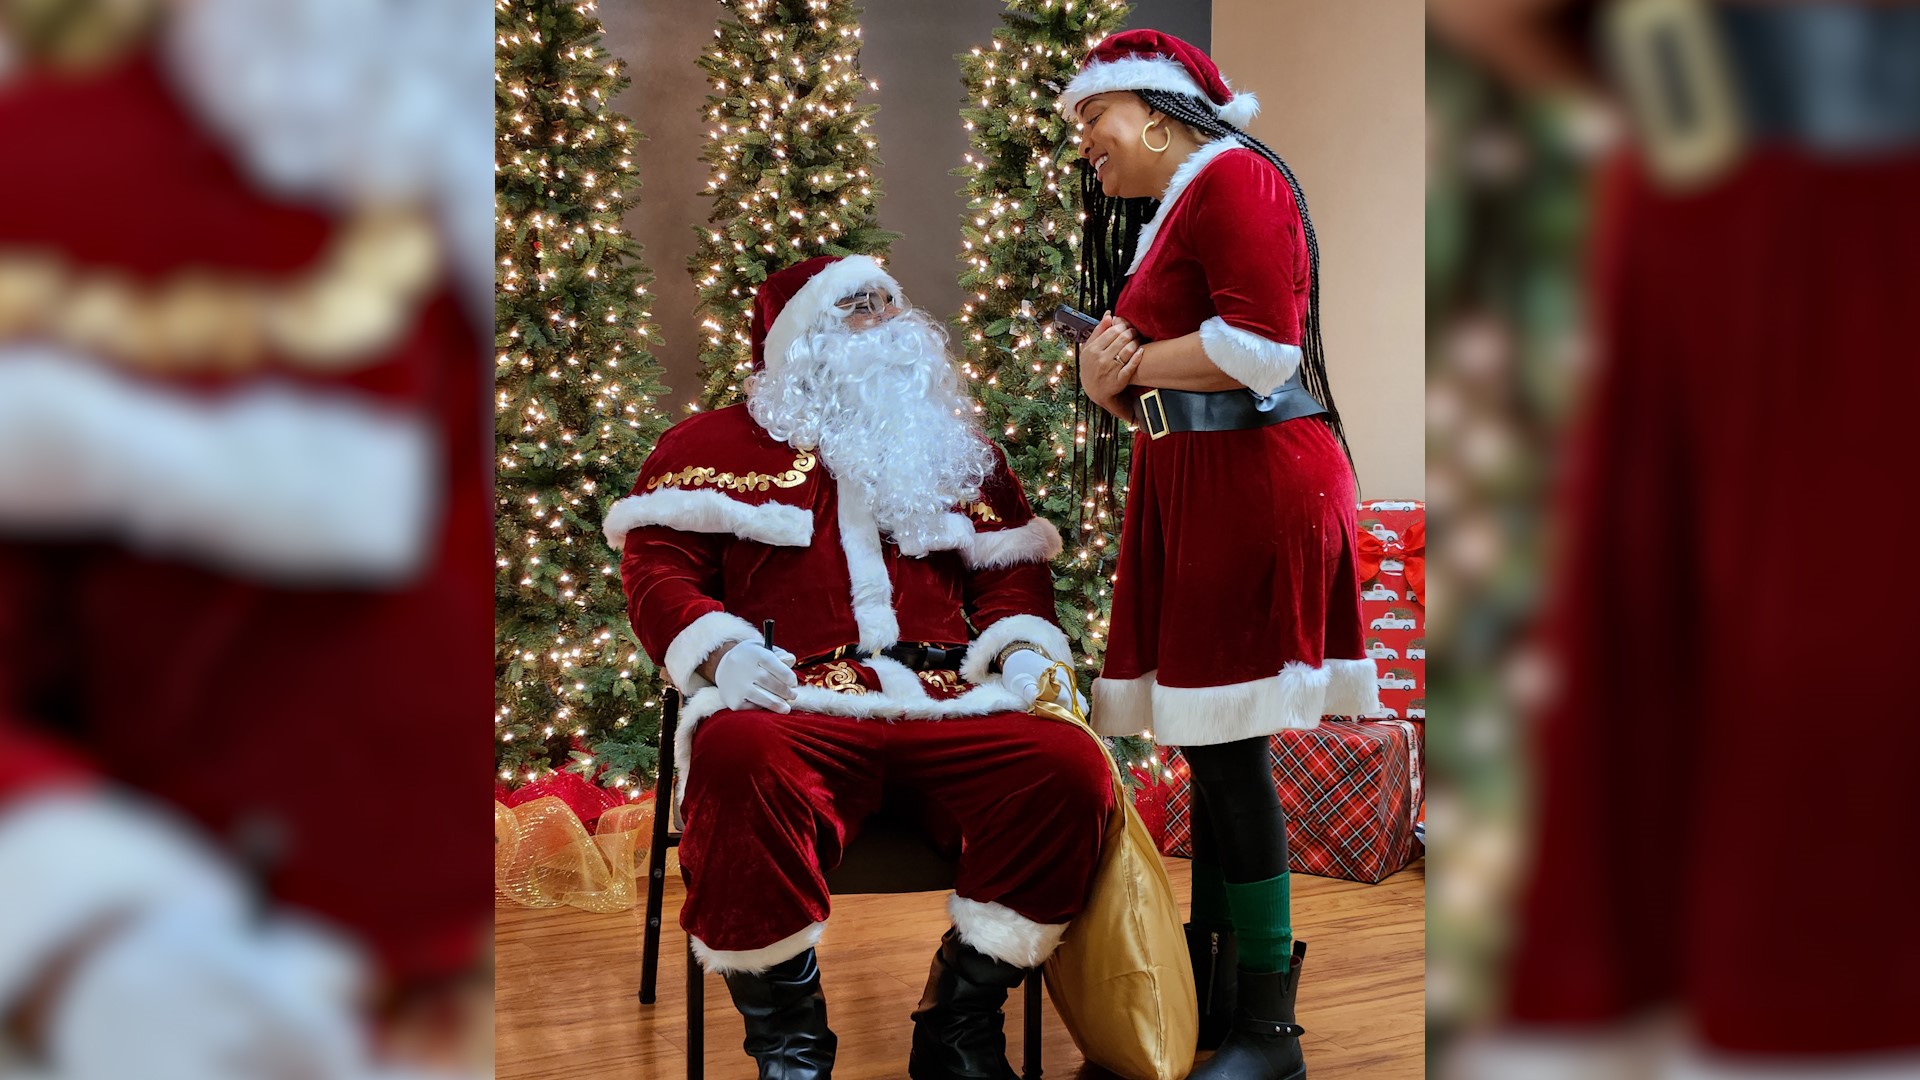 A 2021 survey by National Santa shows White people make up 75% of Santas in the U.S., while Black people account for less than 1%.